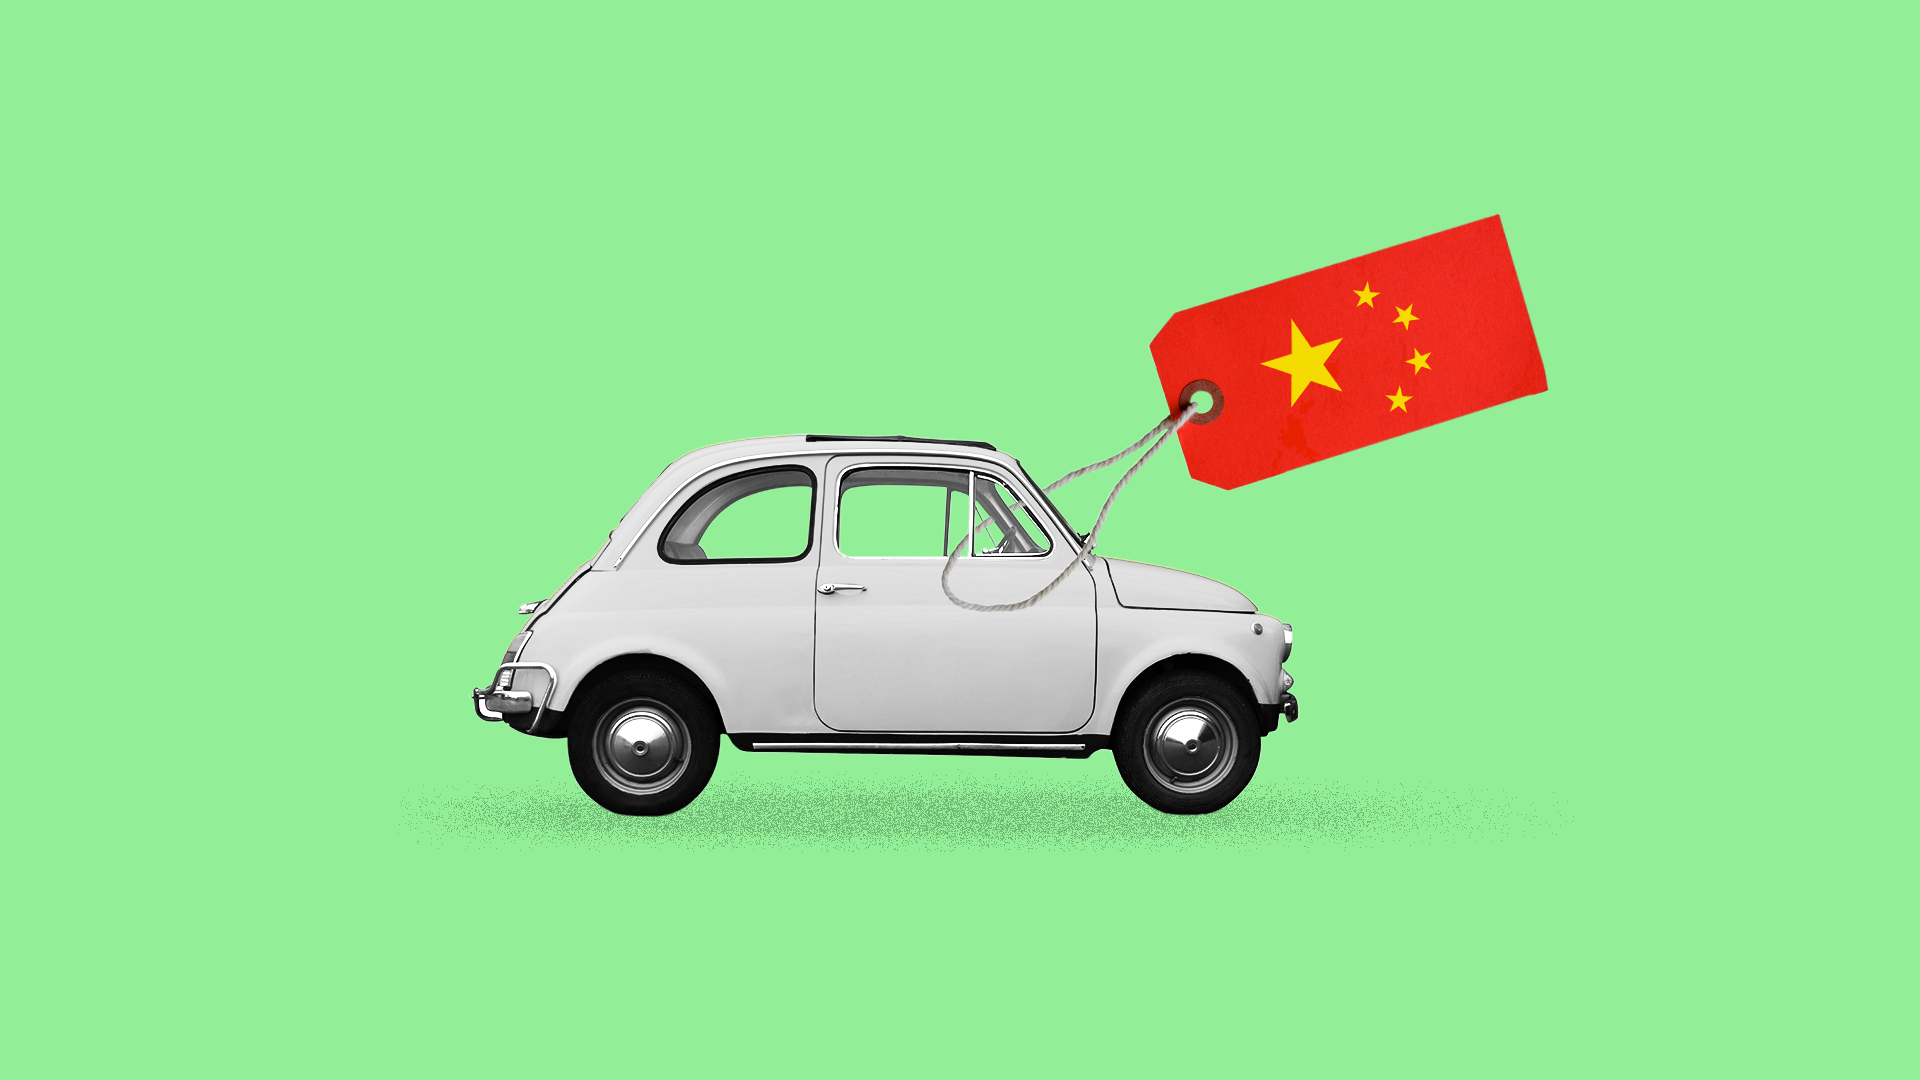 Illustration of a car with a price tag made of the Chinese flag